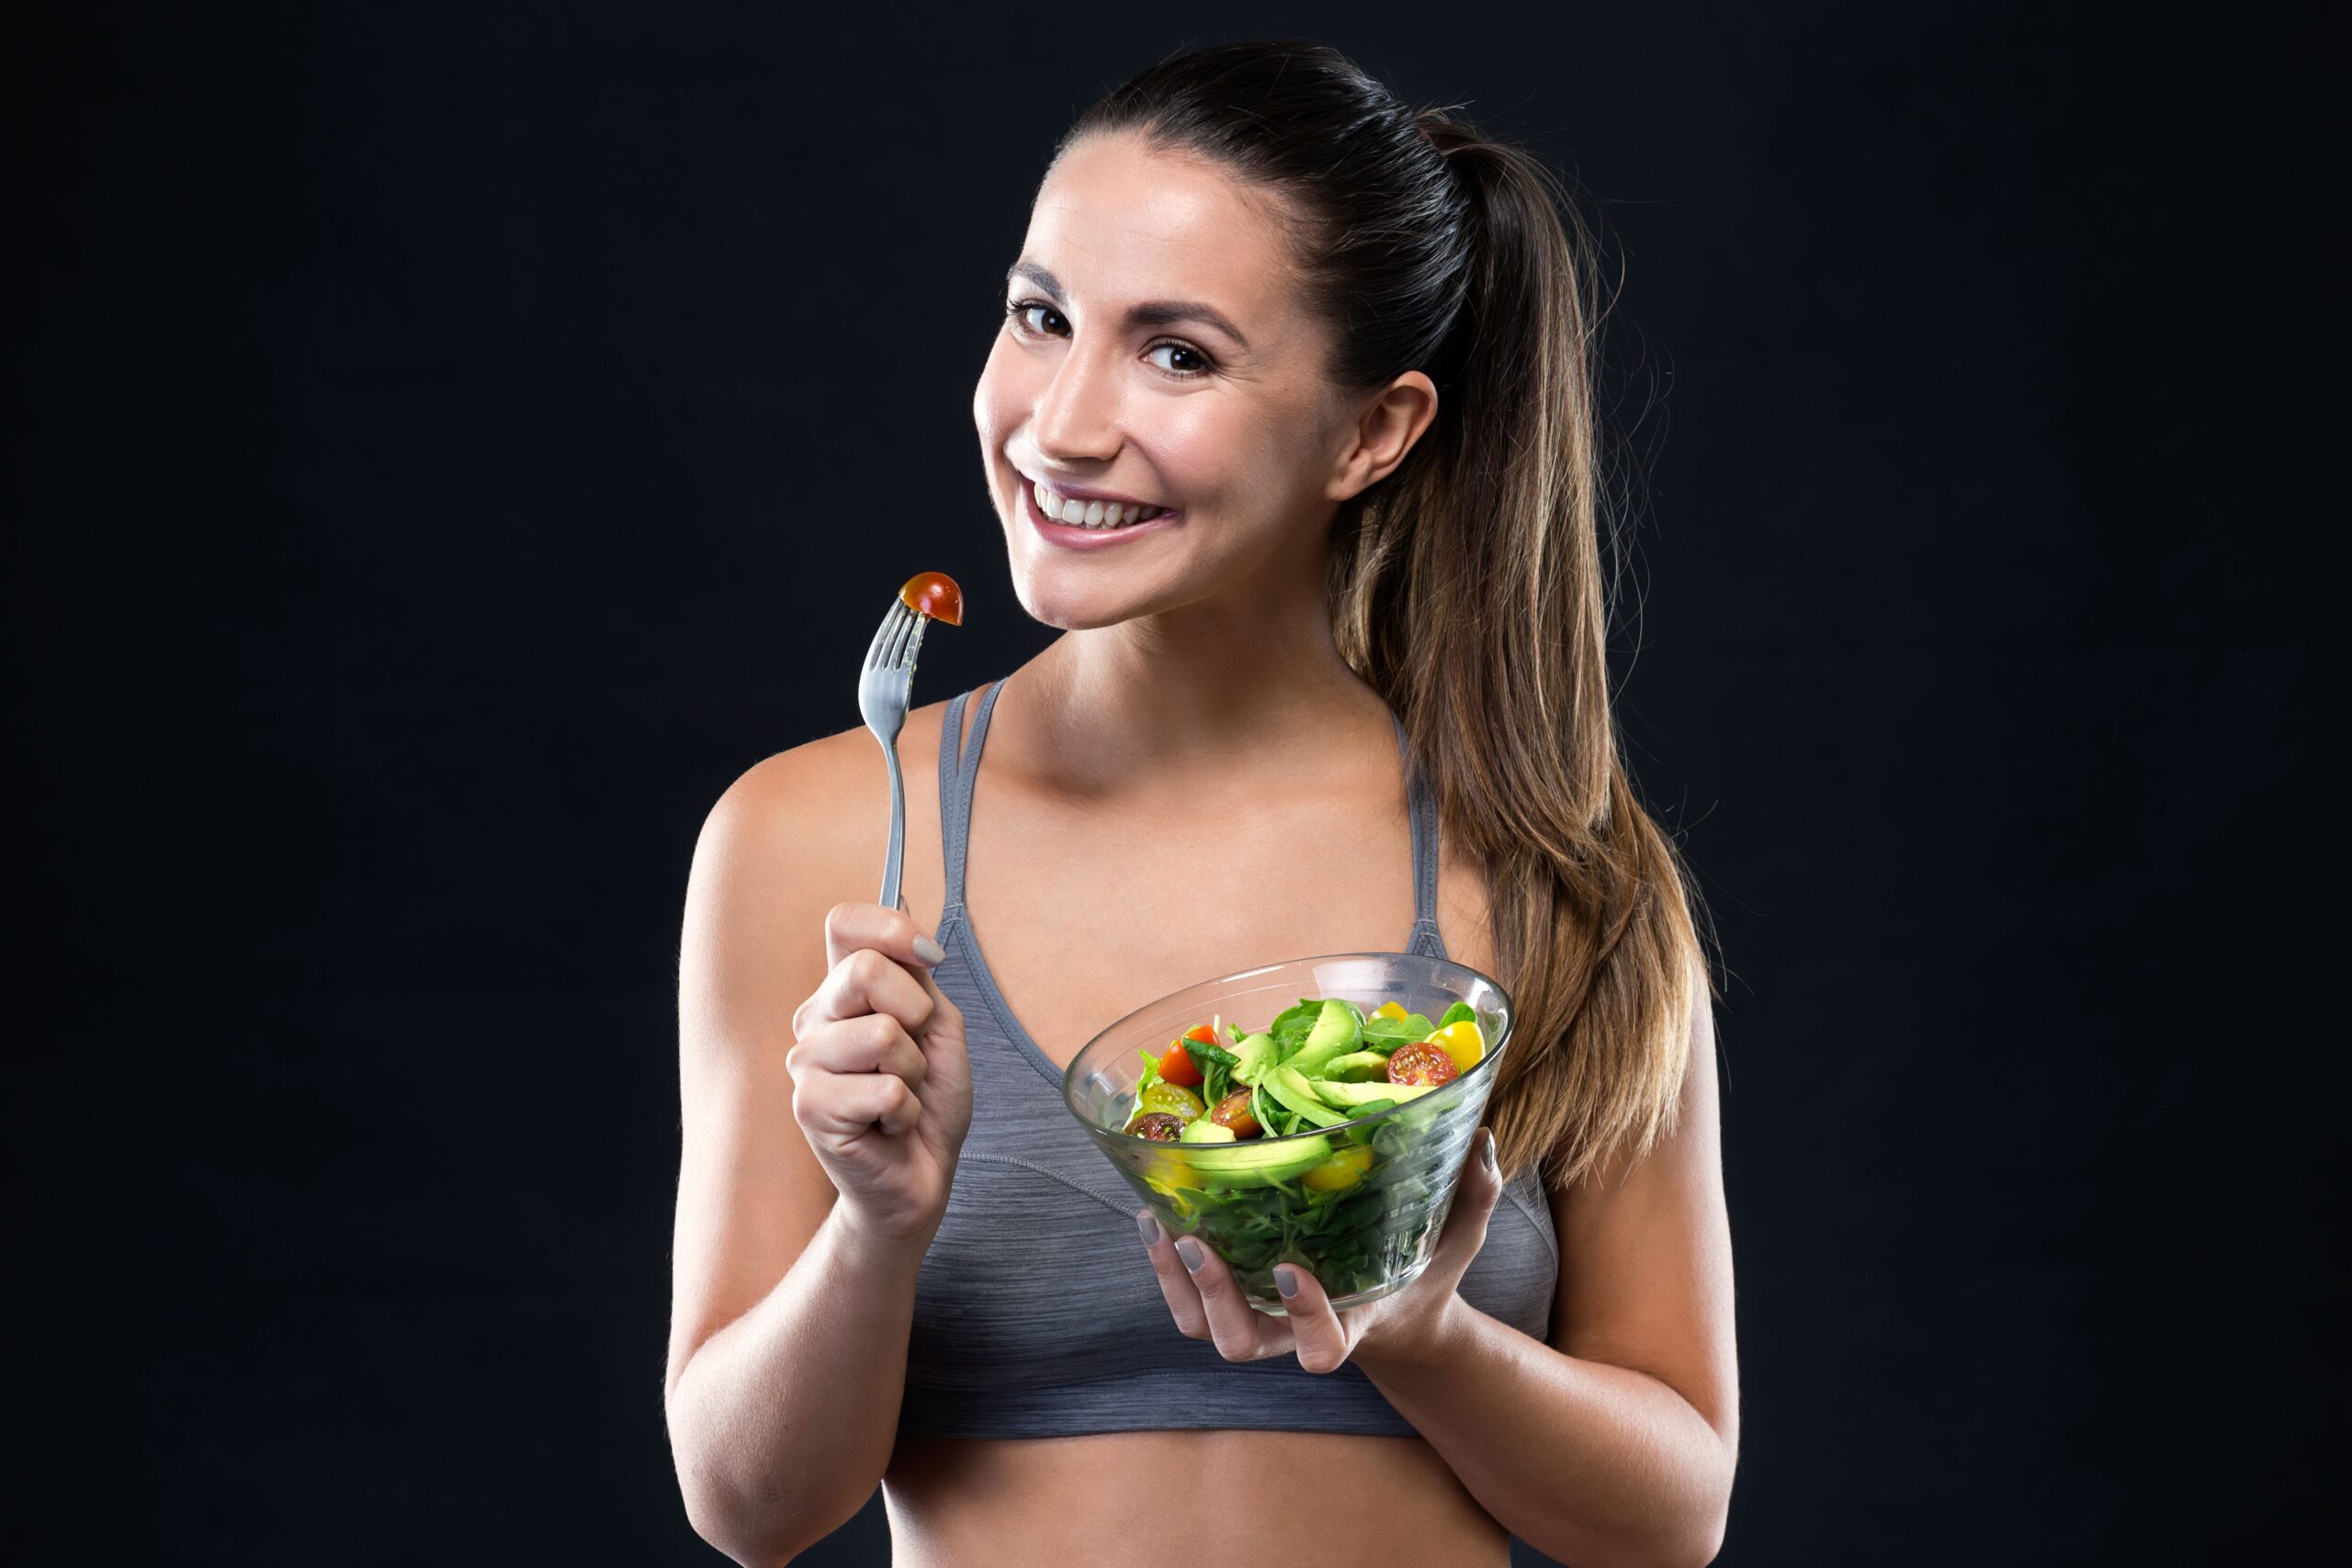 Nutrition 101: A blog post on how to eat a healthy diet.